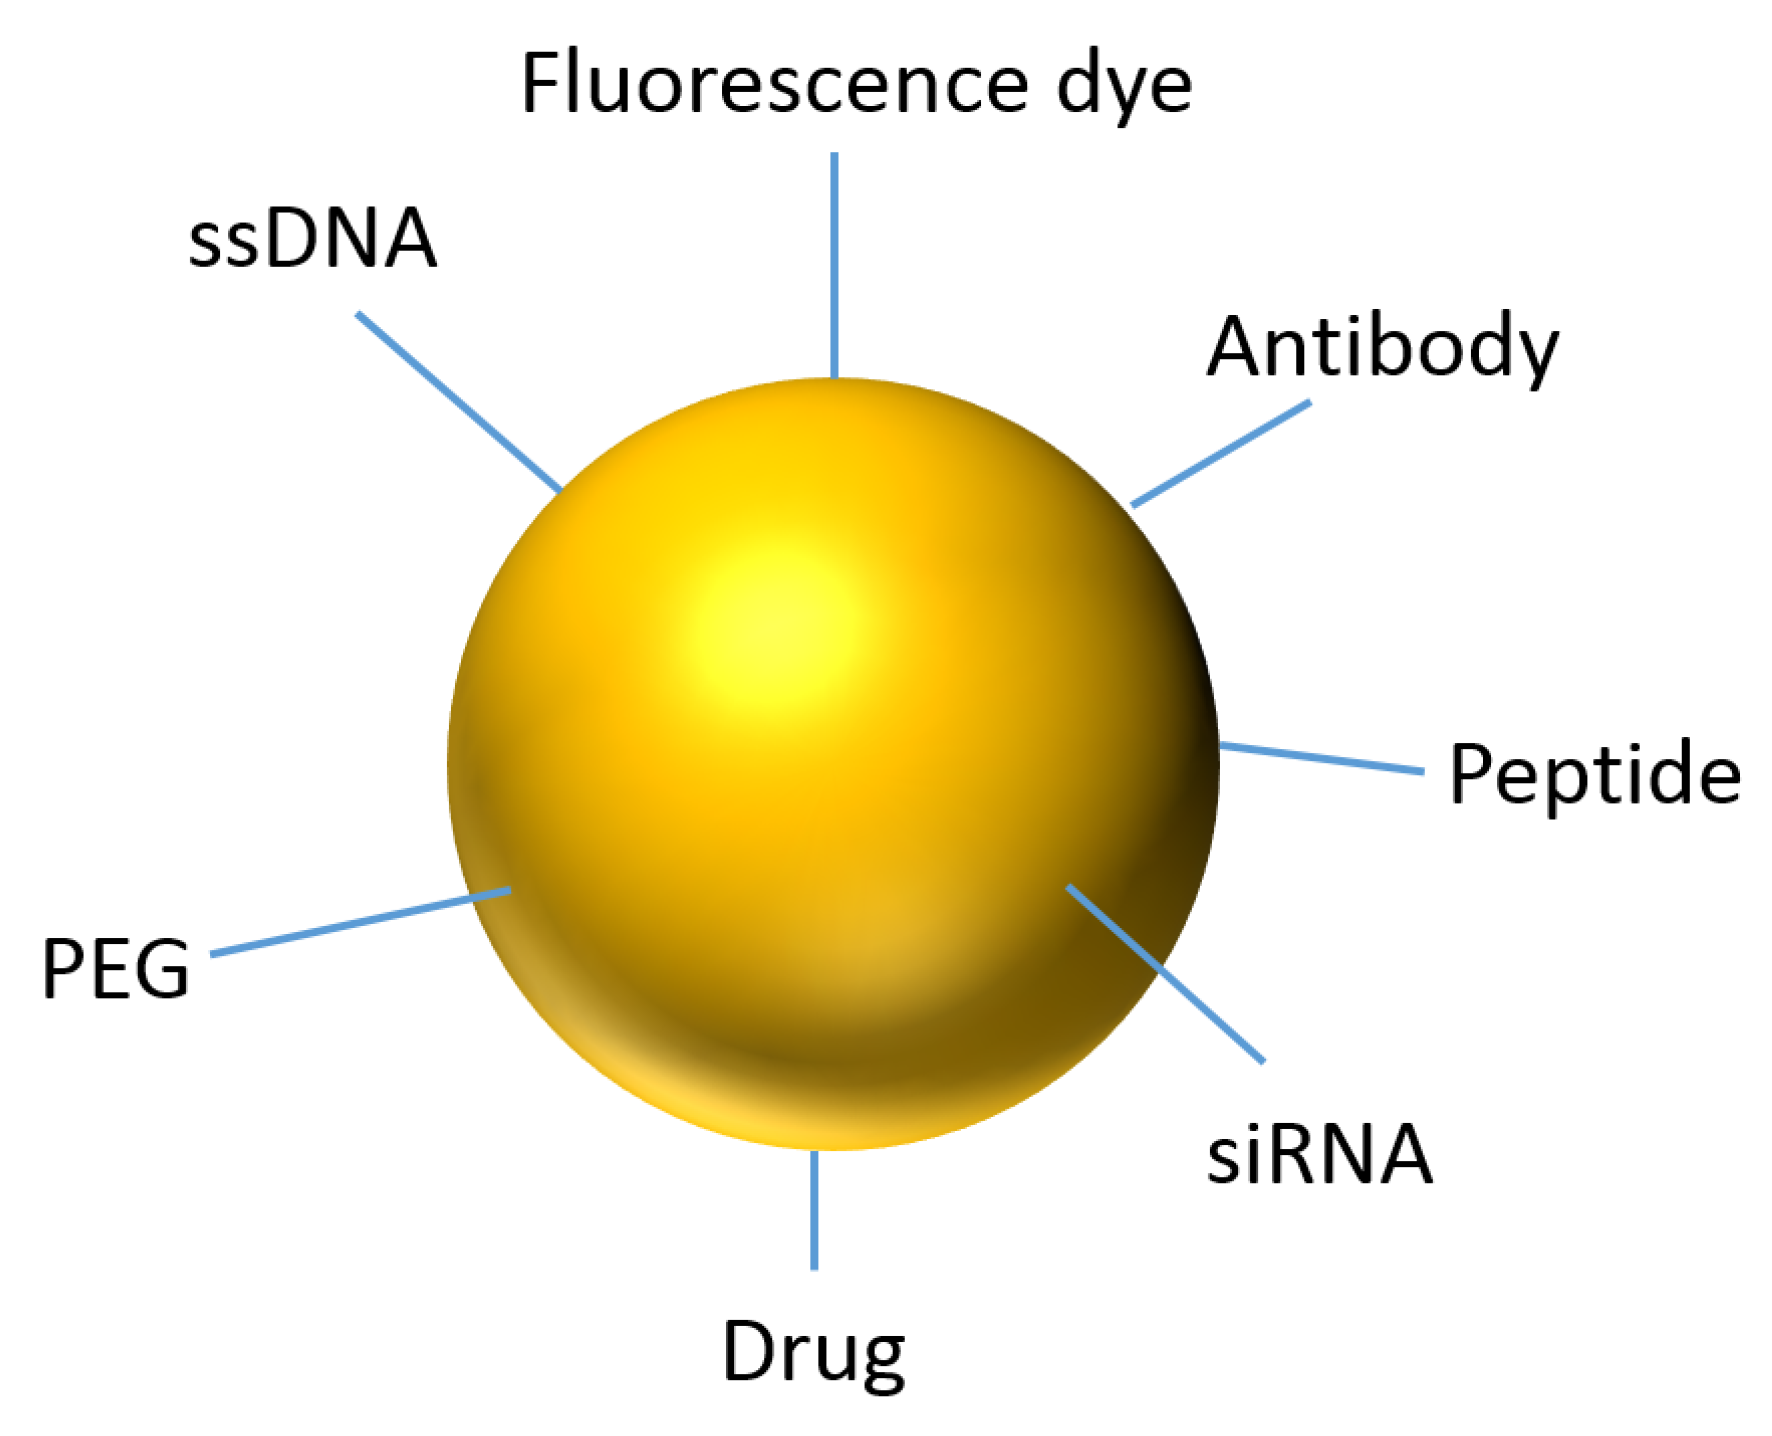 PDF) Perspective Chapter: Gold Nanoparticles Market: A Global